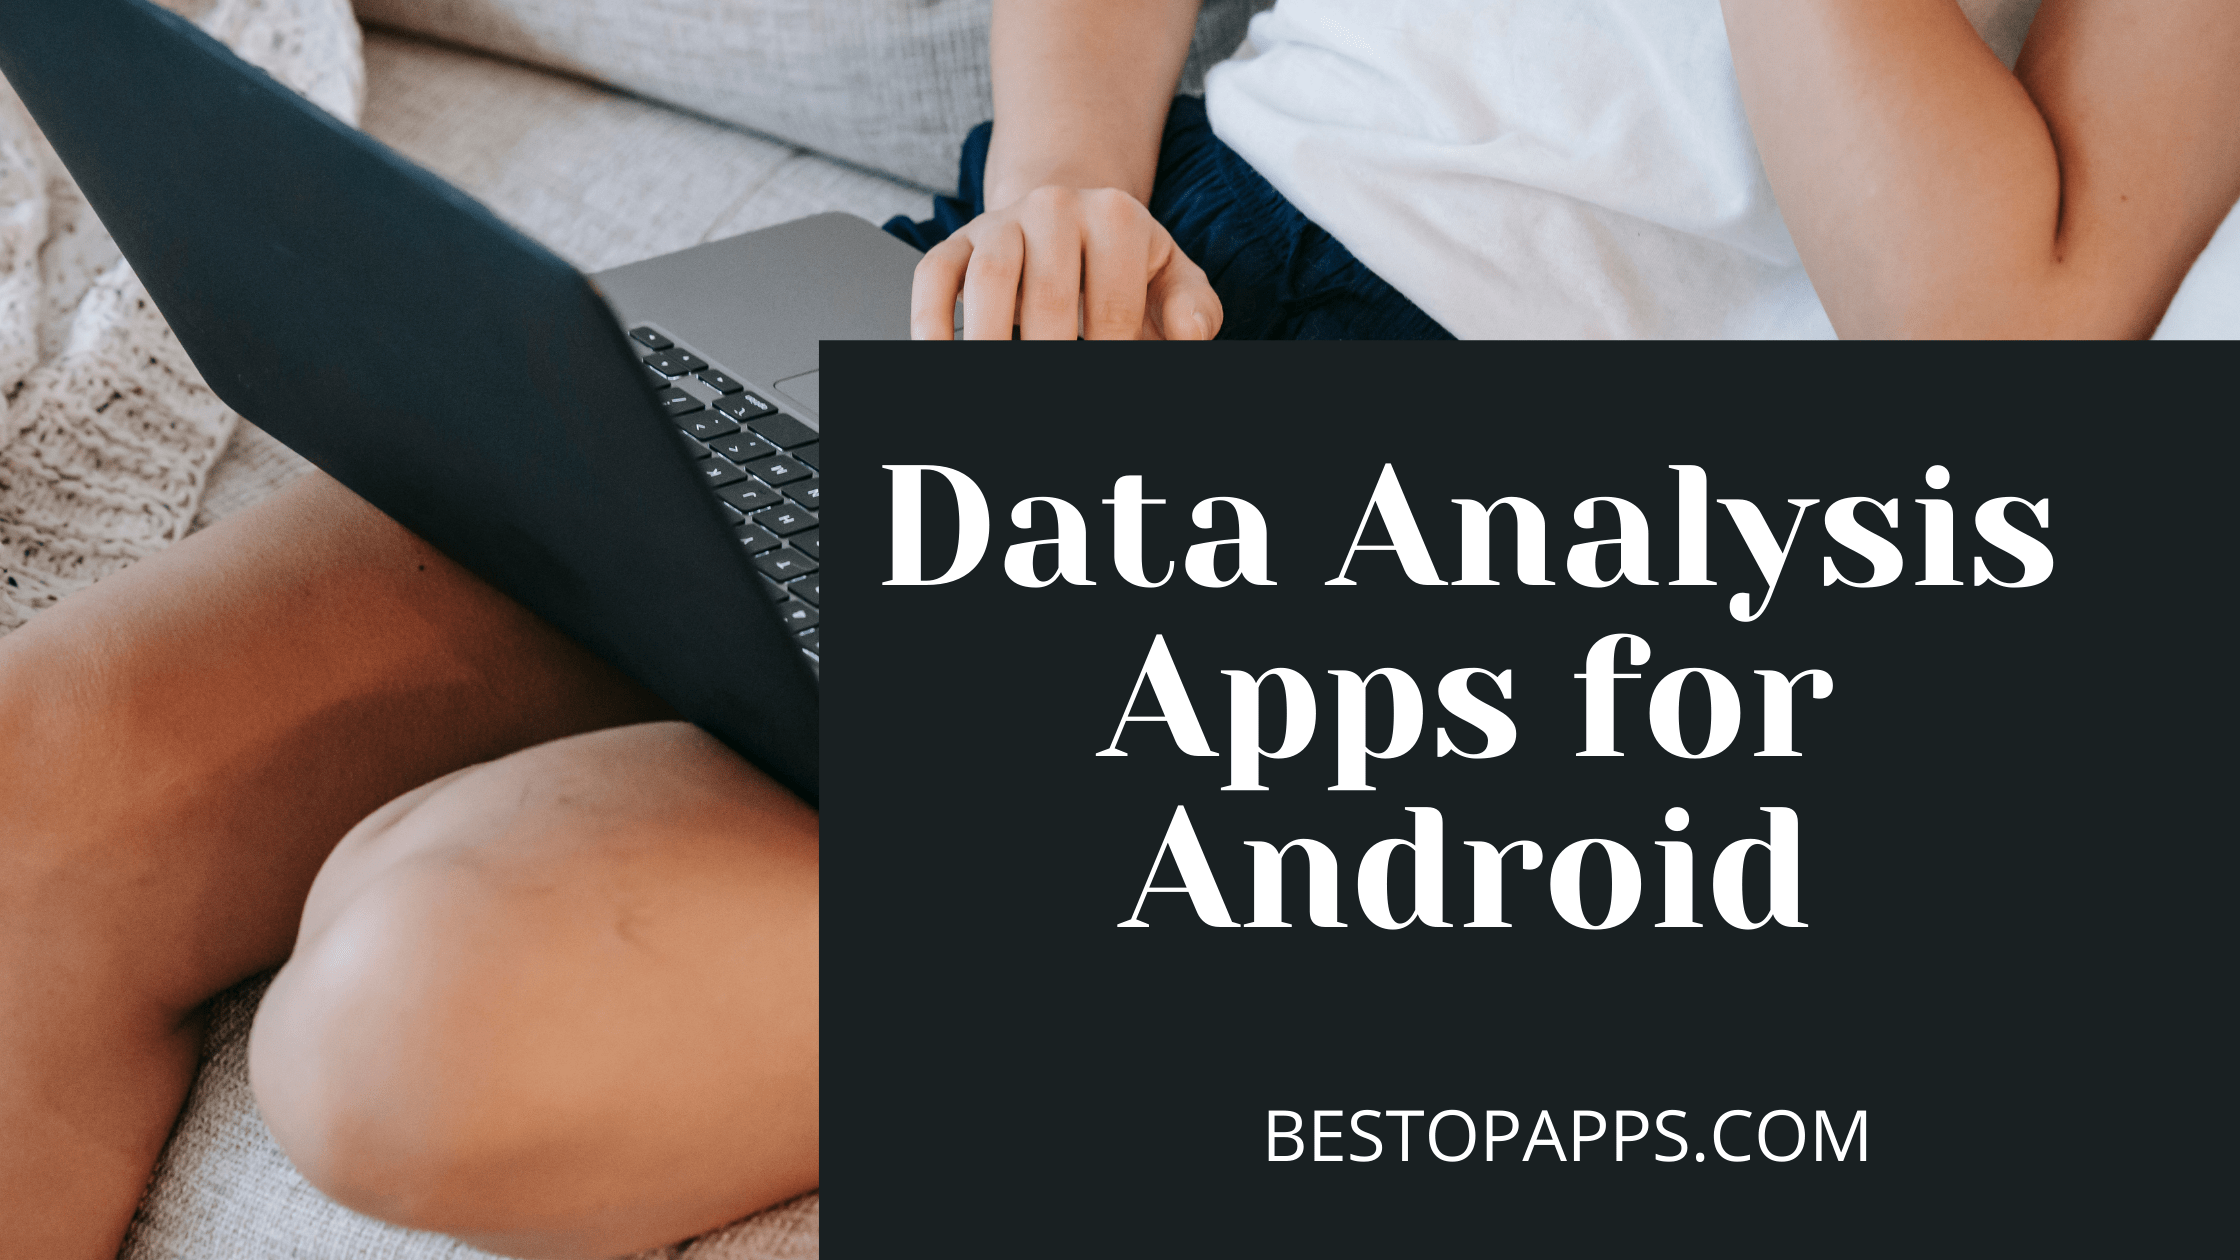 Data Analysis Apps for Android